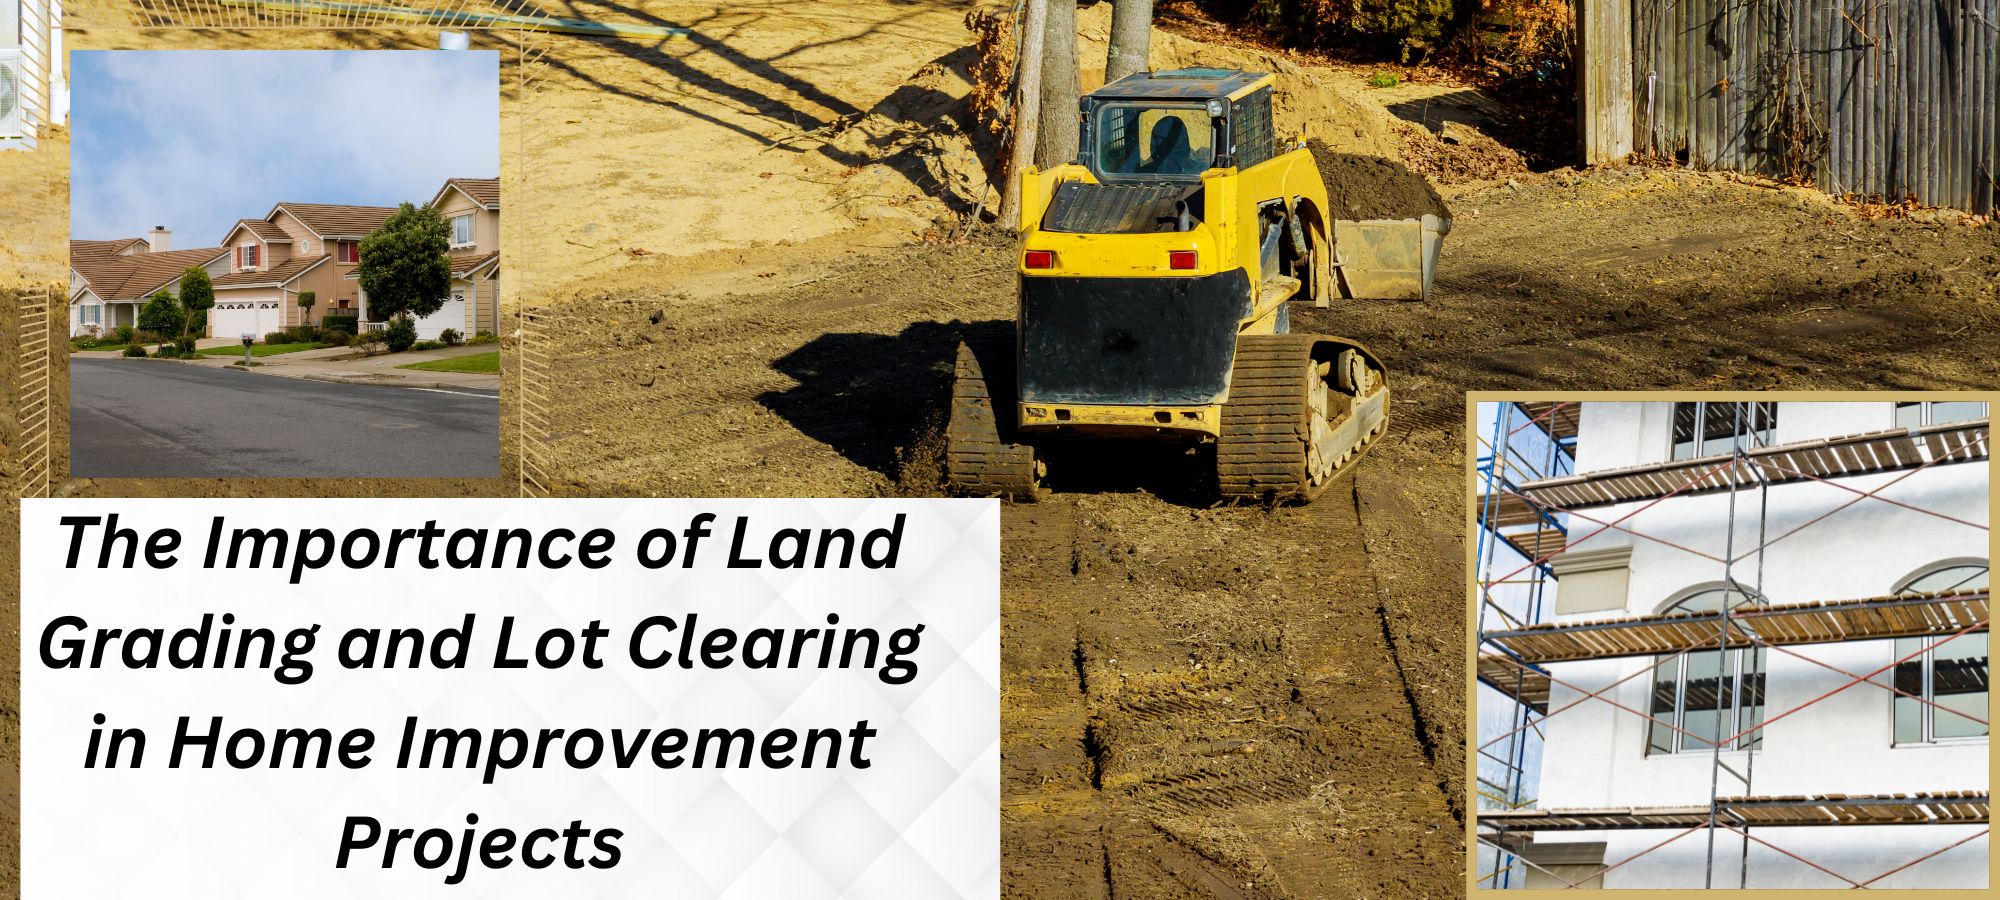 The Importance of Land Grading and Lot Clearing in Home Improvement Projects